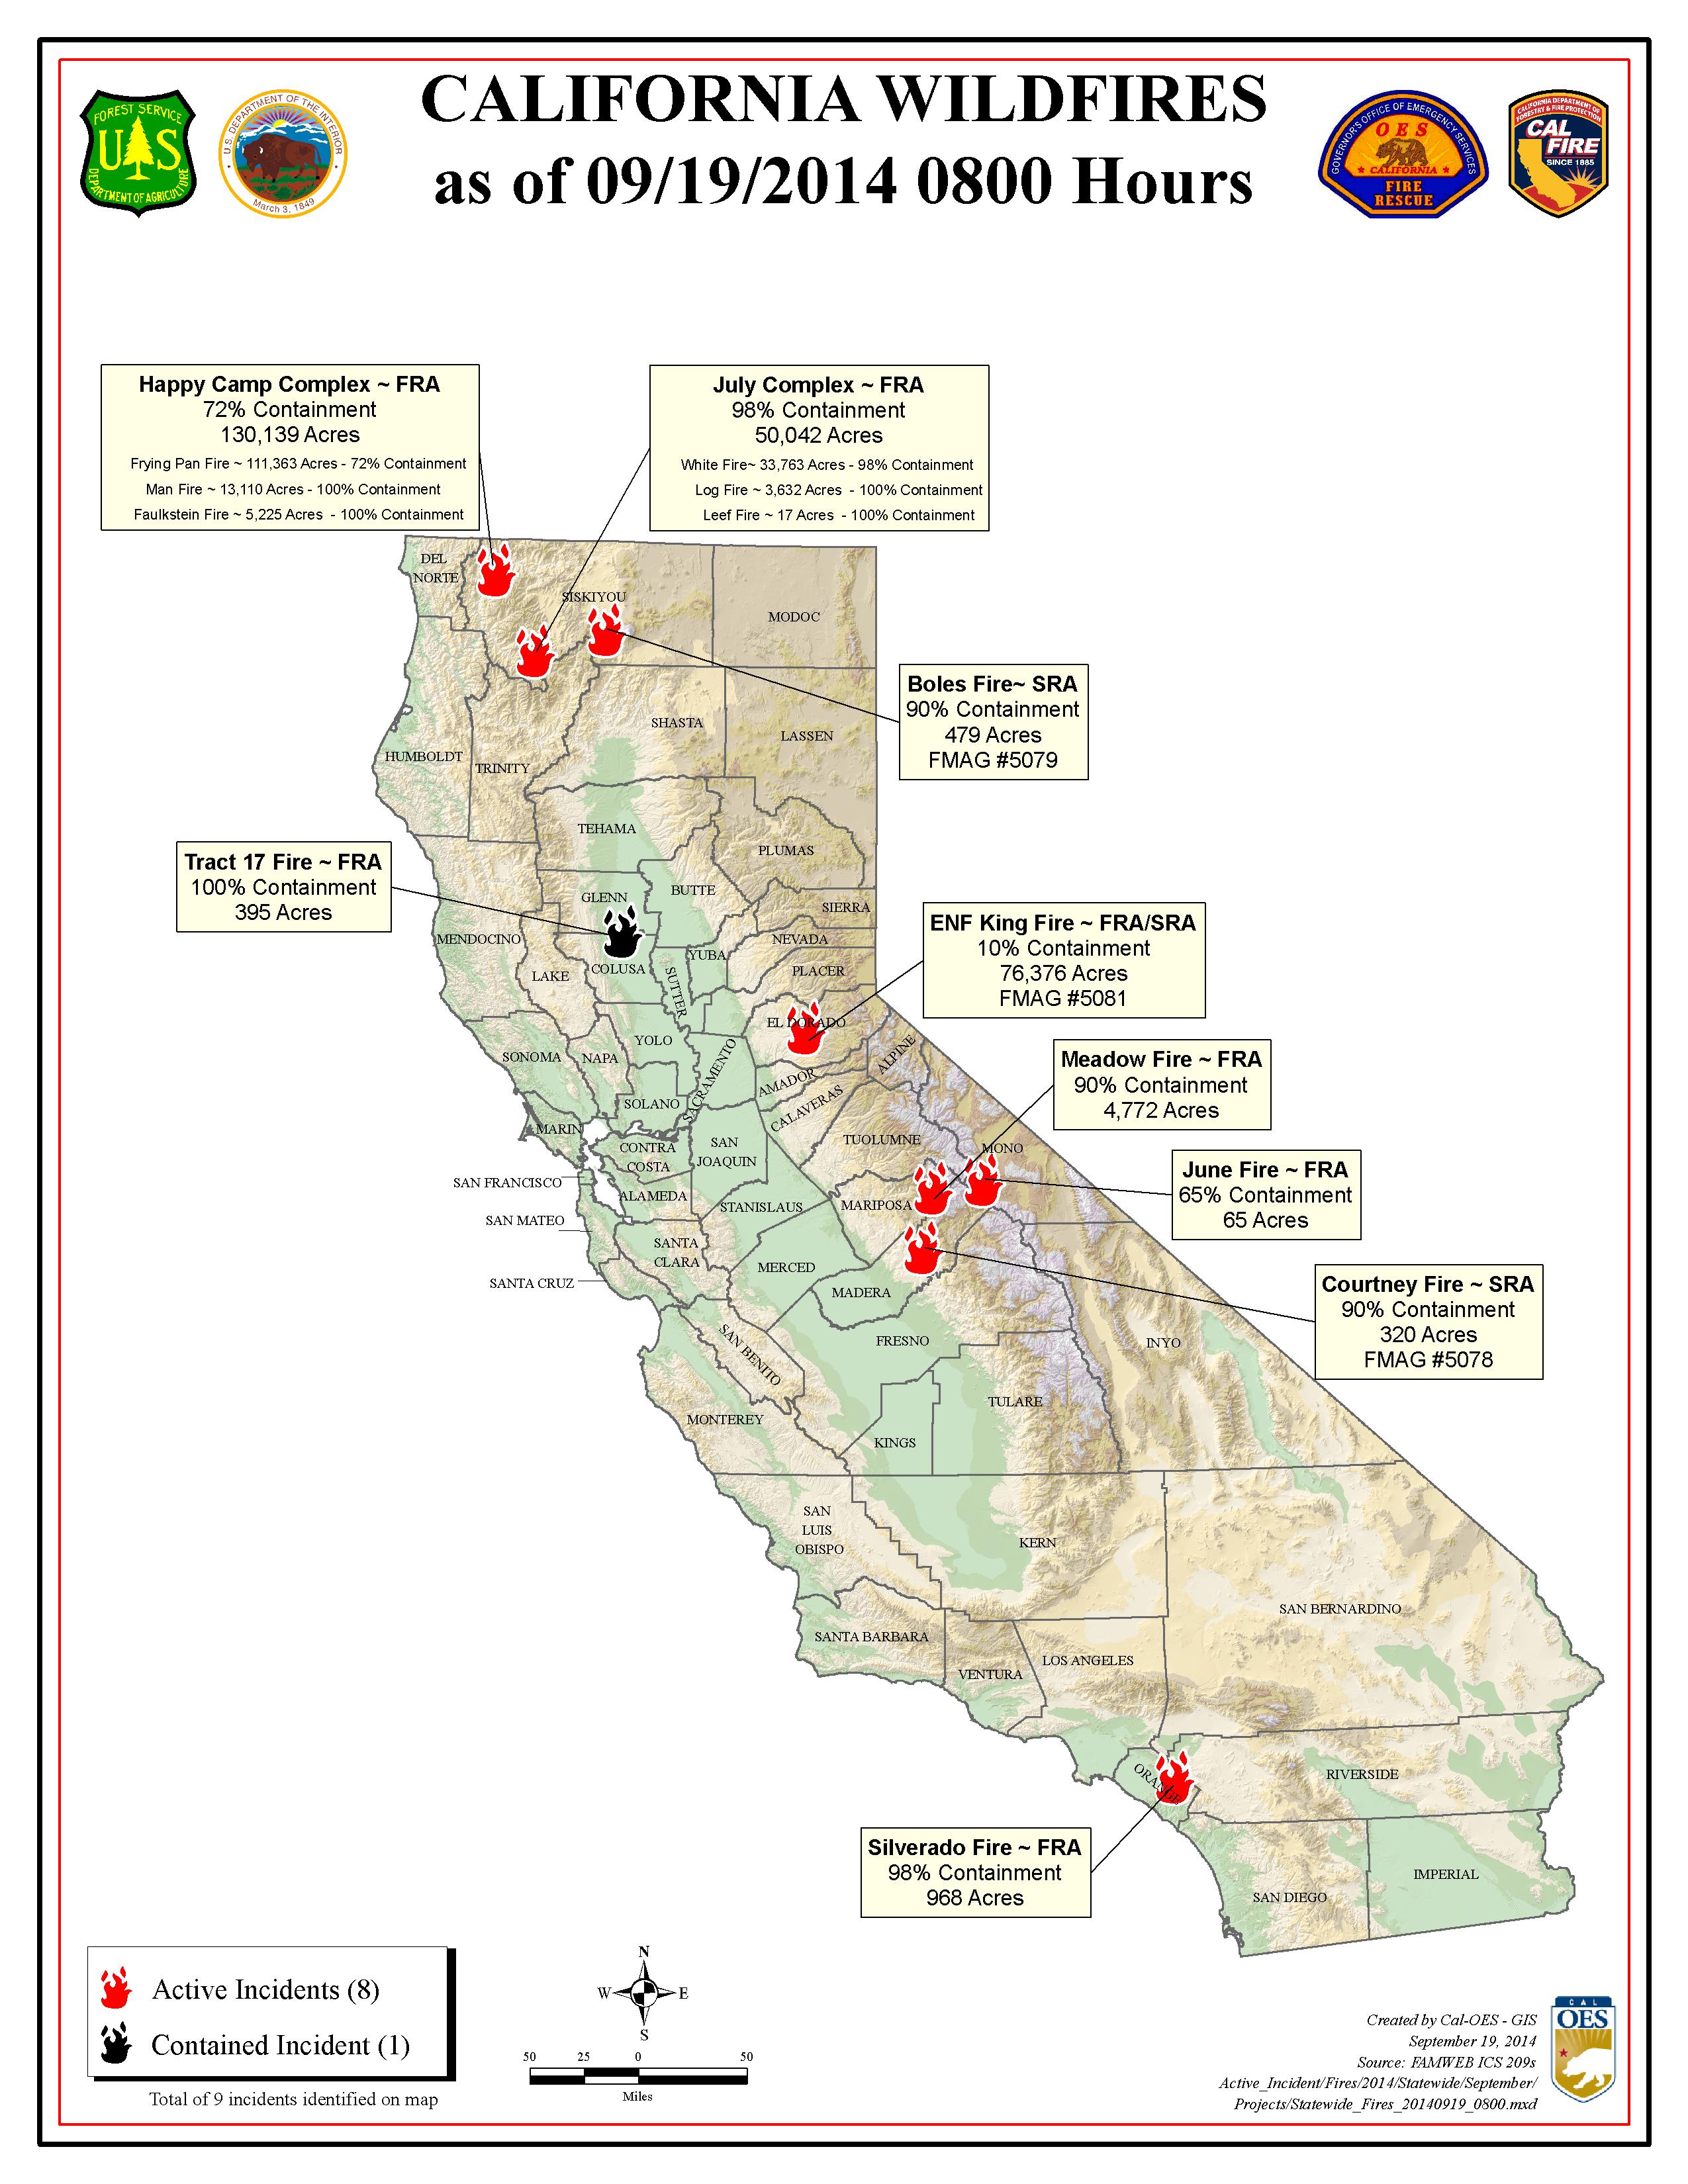 Northern California Forest Fire Map | SexiezPicz Web Porn